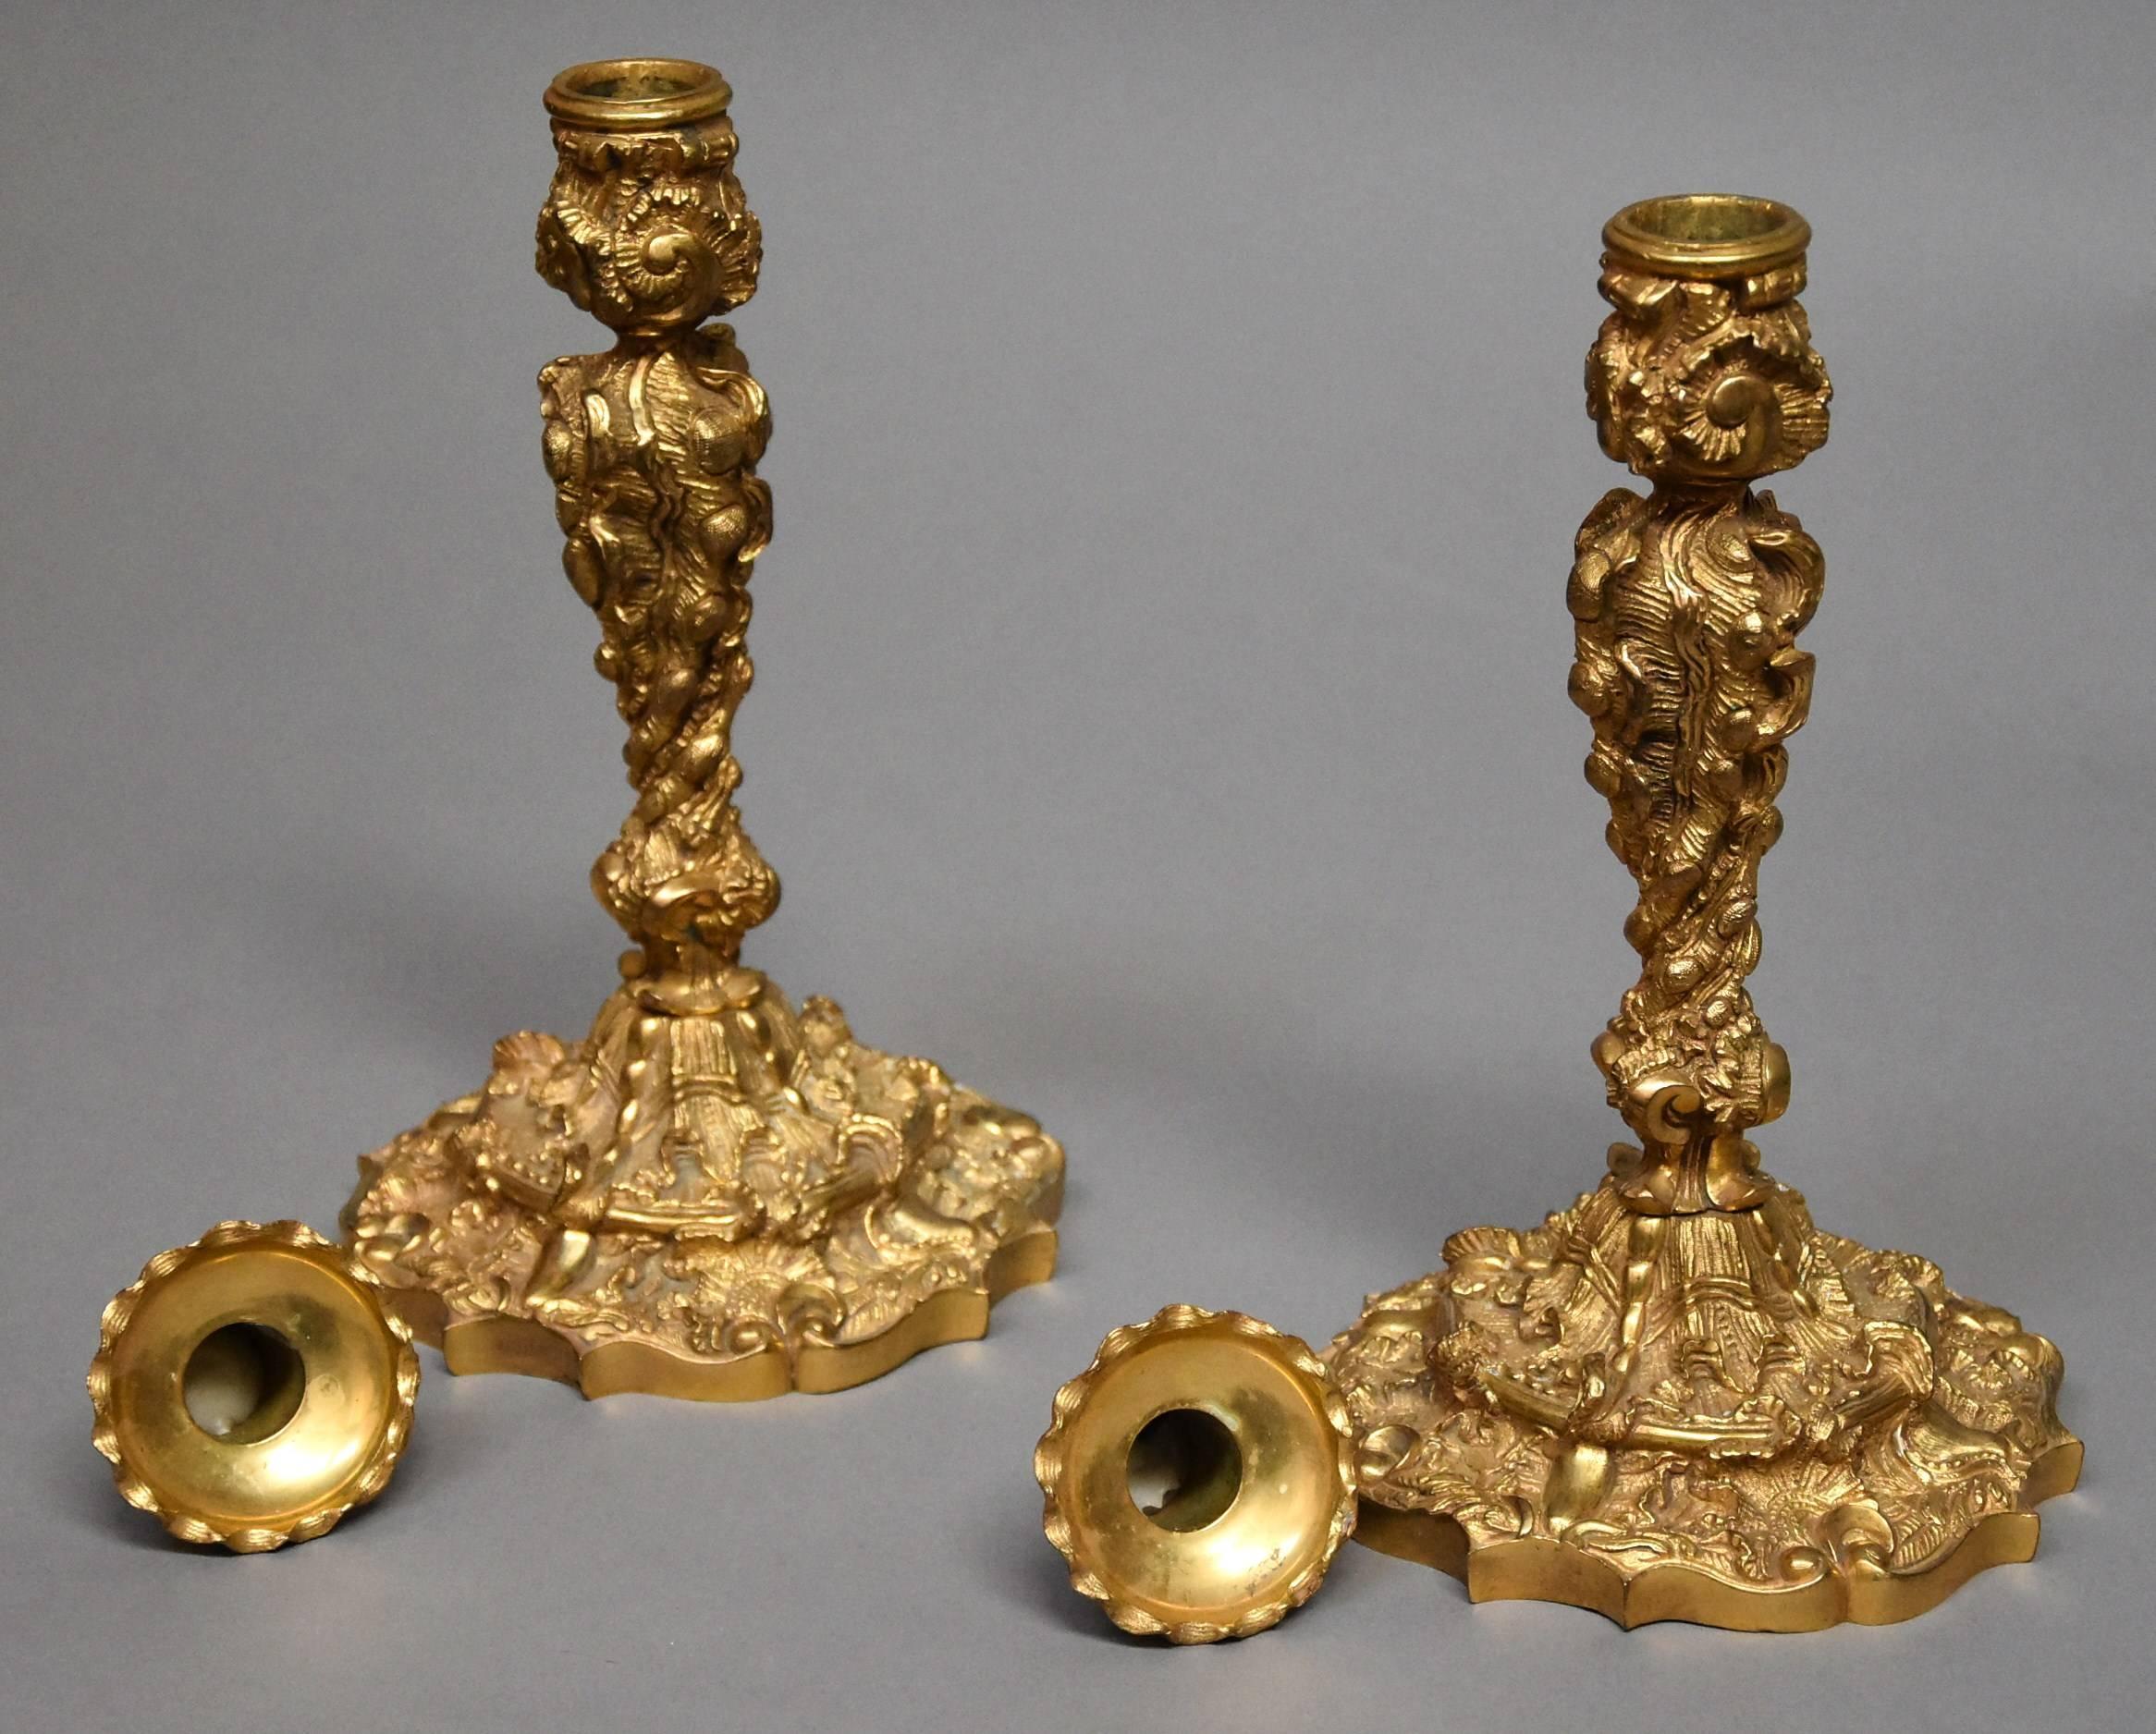 Pair of 19th Century French Ormolu Candlesticks in the Rococo Style 4